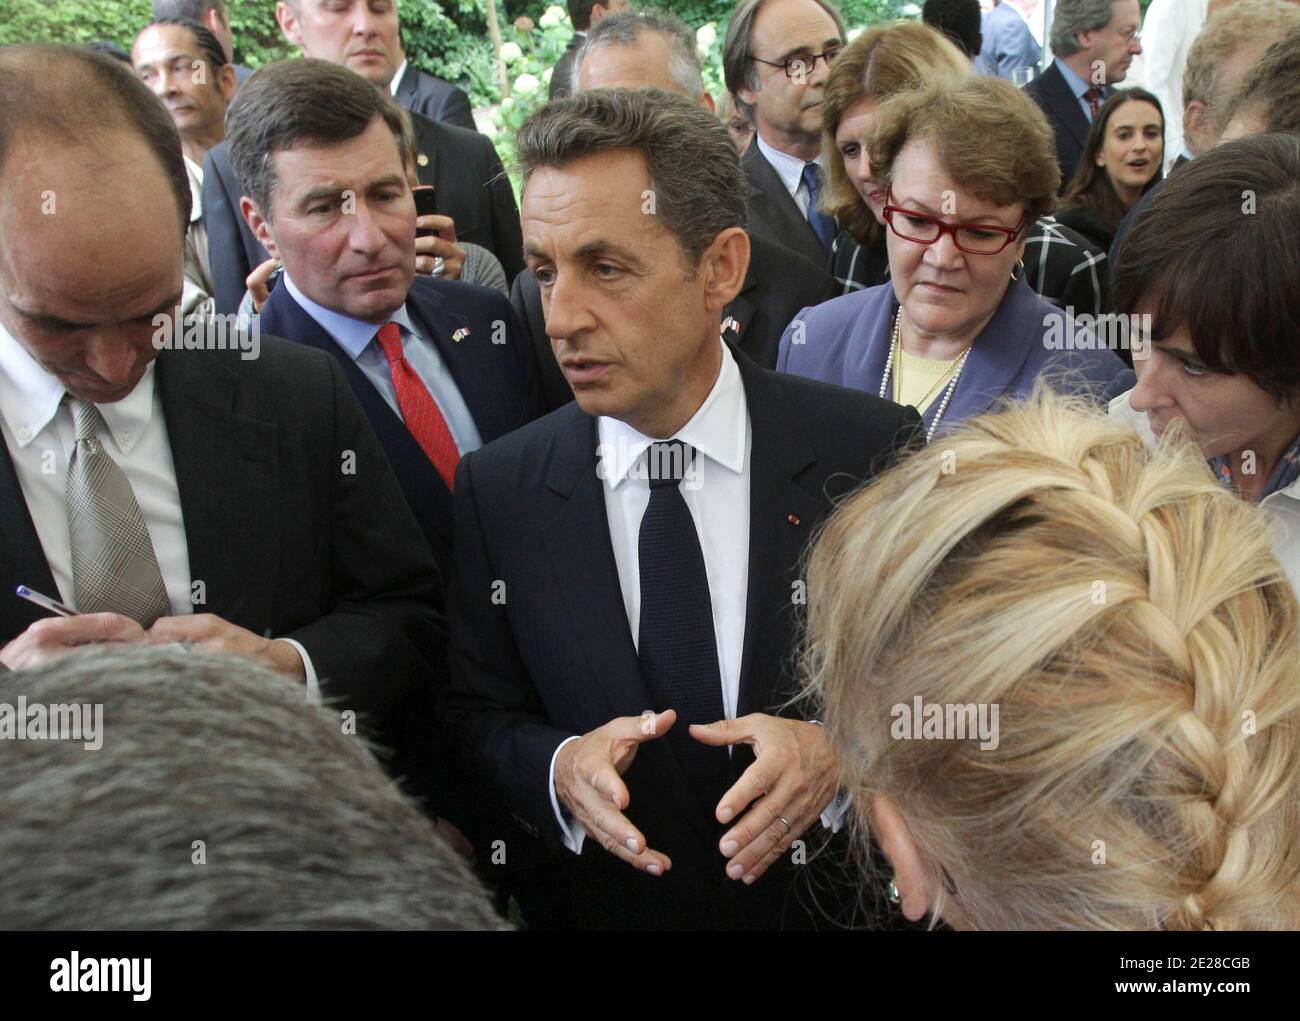 French President Nicolas Sarkozy, gestures as he speaks to the media, after he attends a ceremony at the U.S. Embassy in Paris, France on Septembre 9, 2011, ahead of the 10-year anniversary of the attacks on Sunday. U.S Ambassador Charles Rivkin, left, and embassy staff Margaret C. Flott, right, who survived the attack on the Pentagon September 11. from Sarkozy. Photo by Michel Euler/ABACAPRESS.COM Stock Photo